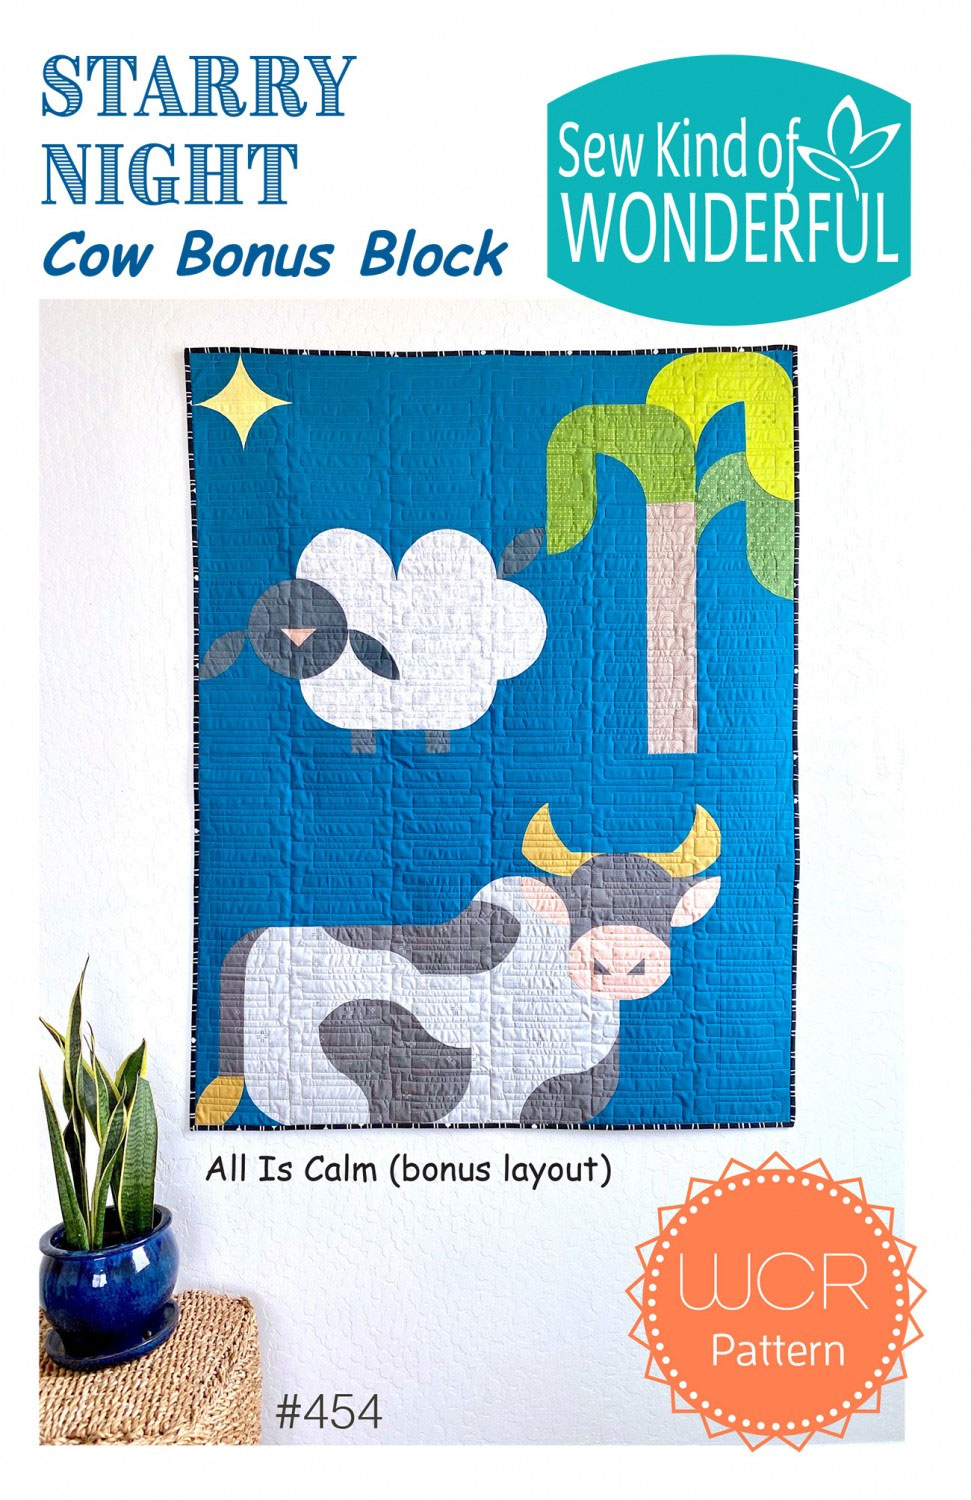 Starry-Night-Cow-bonus-block-quilt-sewing-pattern-sew-kind-of-wonderful-front